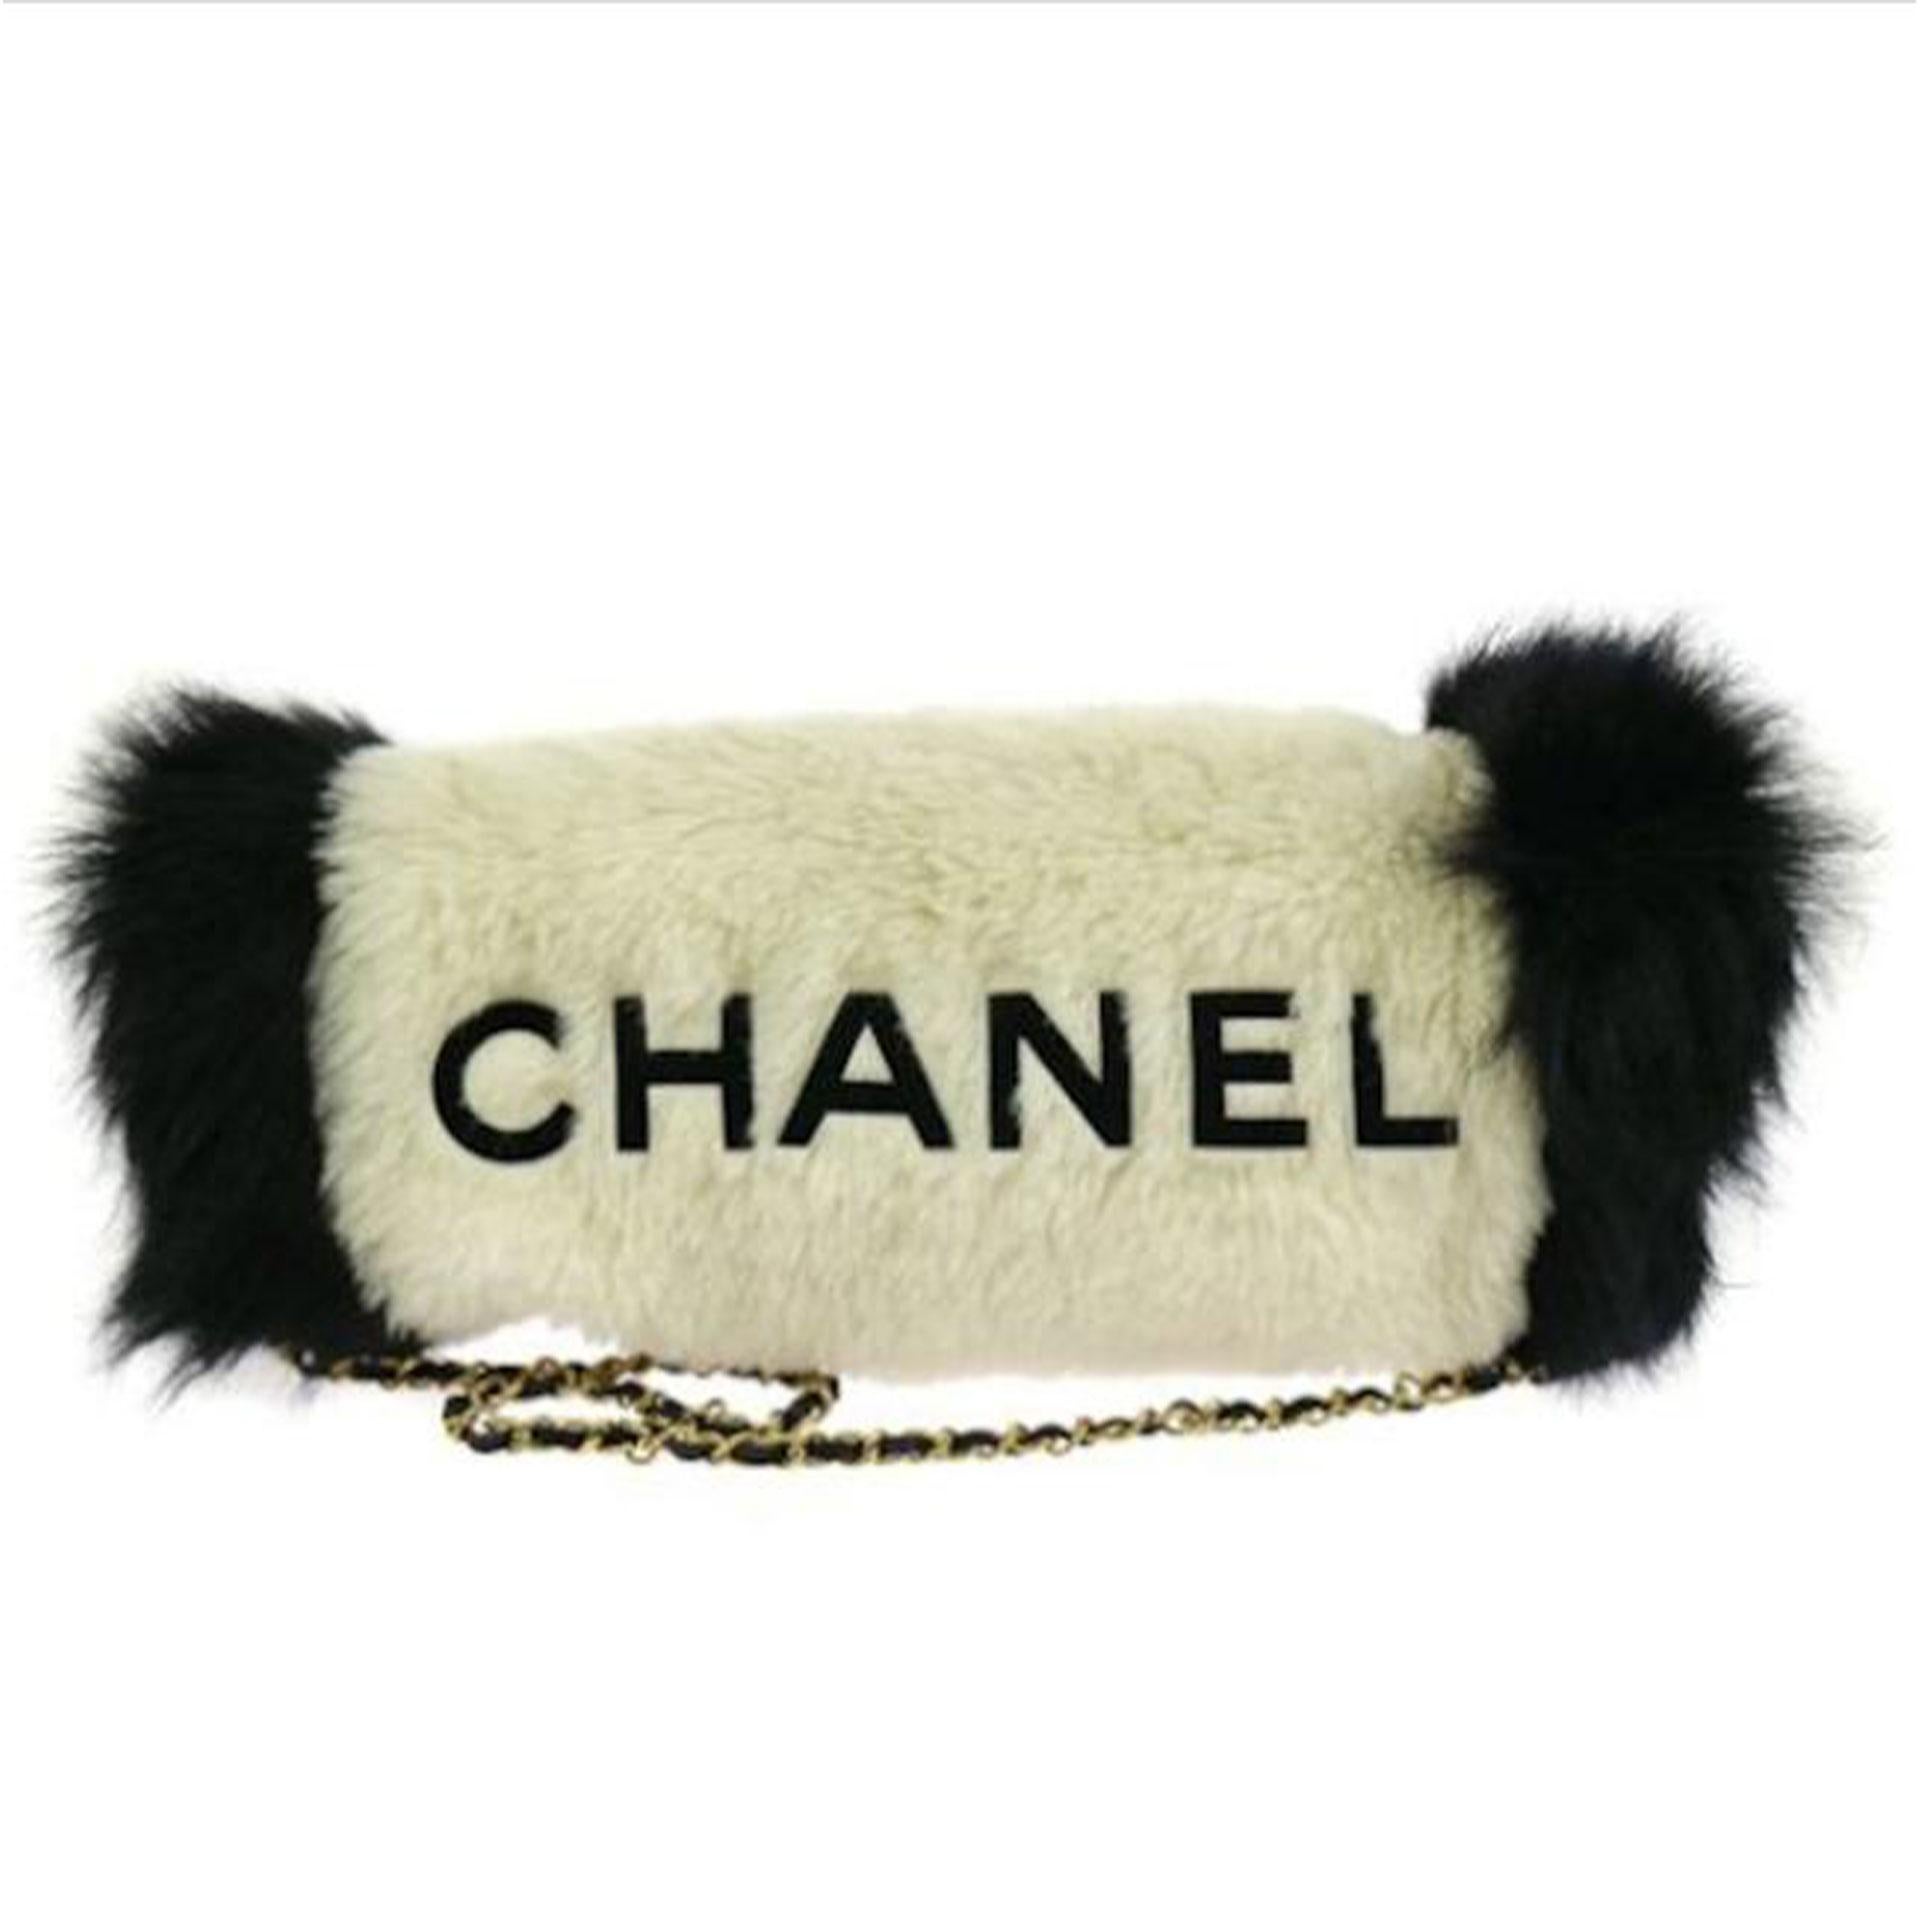 Chanel Logos Hand Warmer with Chain Strap Muff White Faux Fur Cross Body Bag For Sale 2